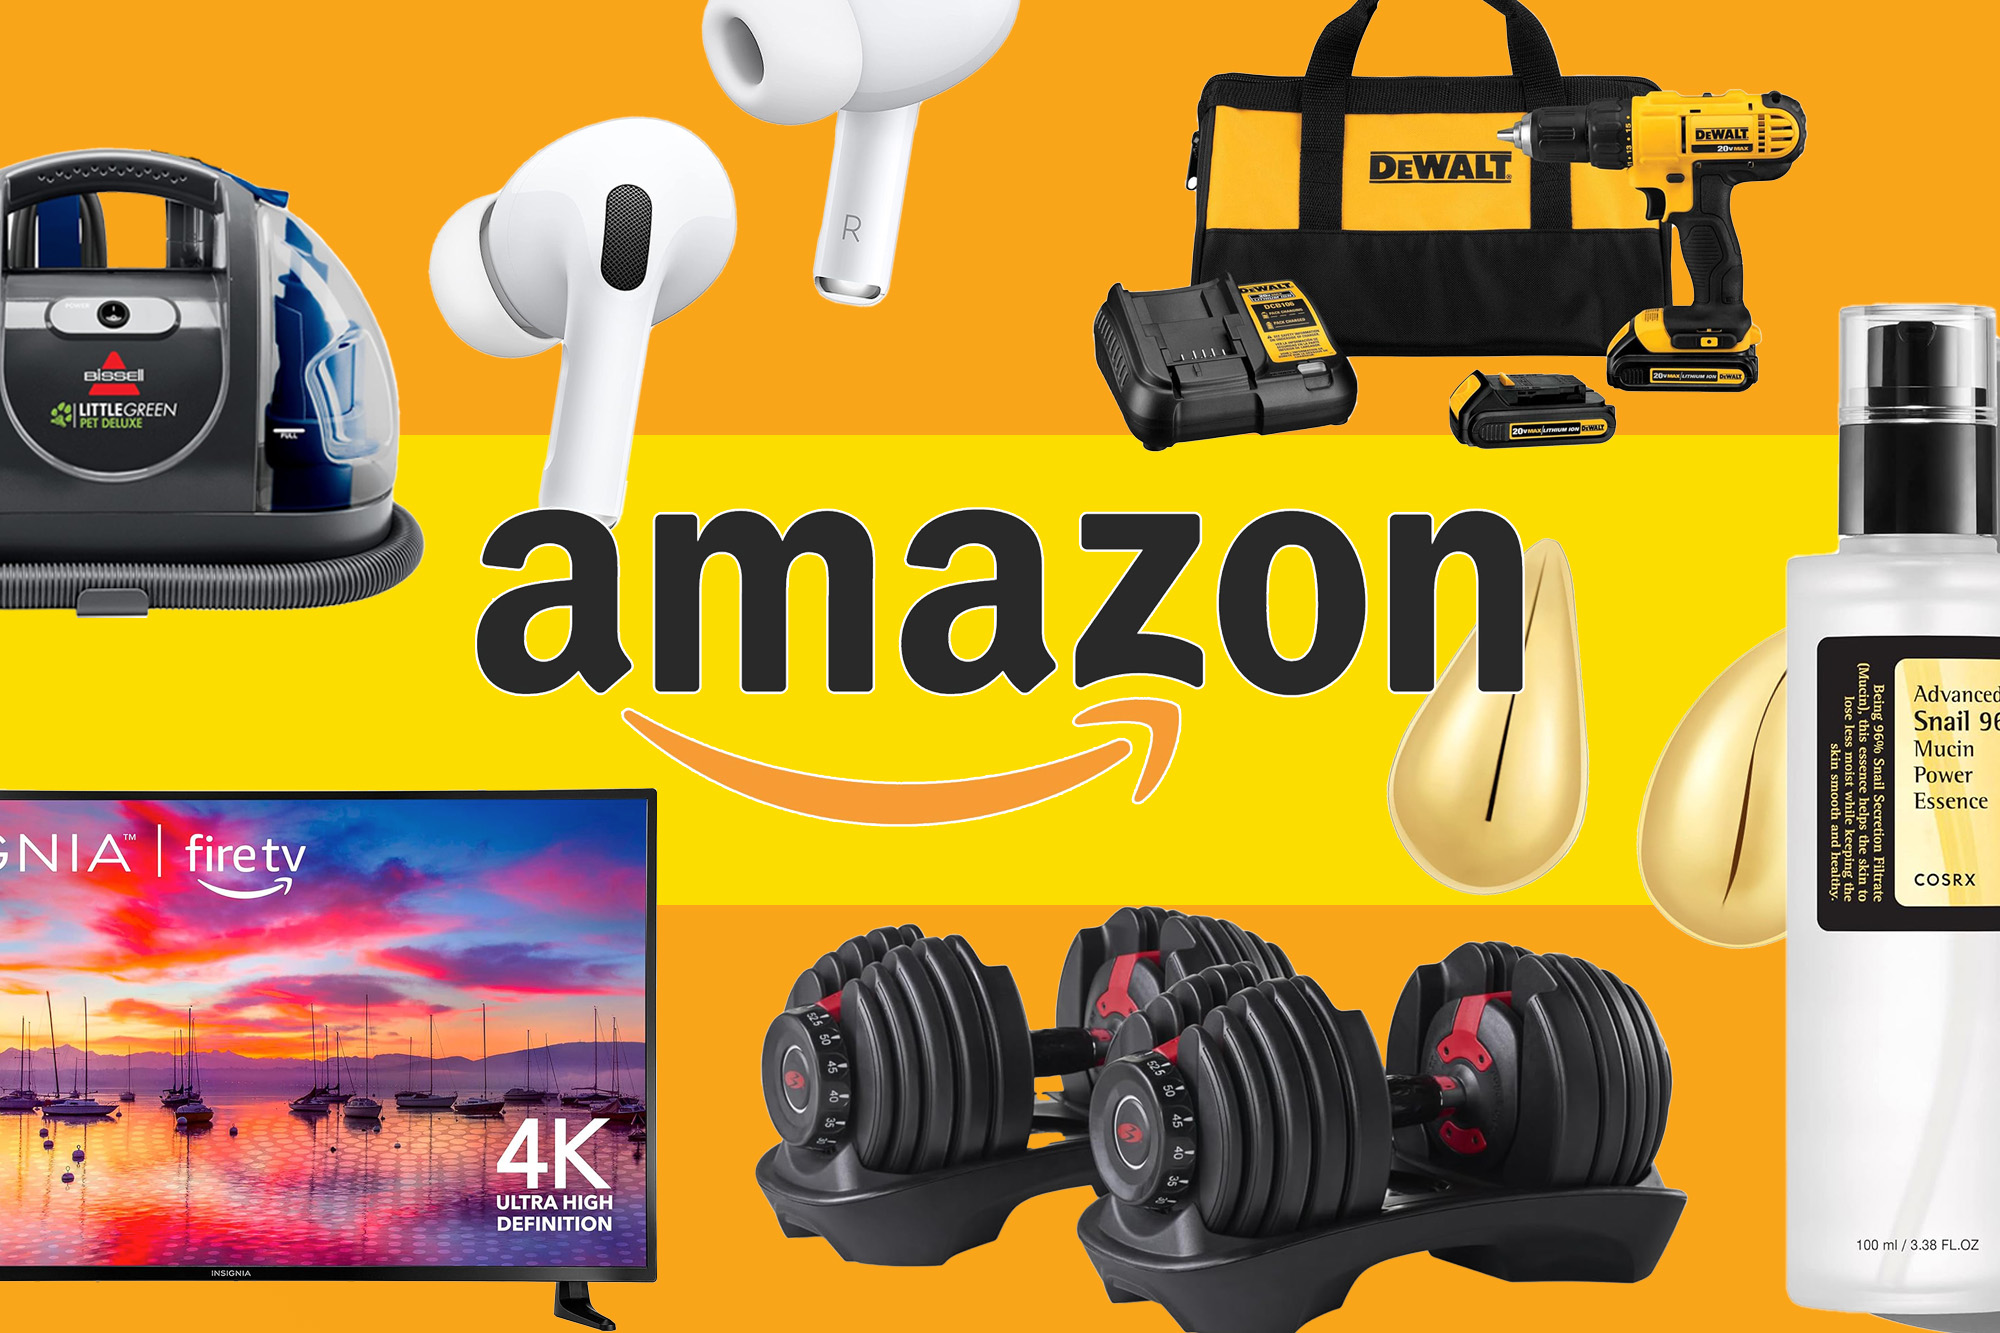 We just spotted 21 of Amazon’s best weekend deals: AirPods, DeWalt, more